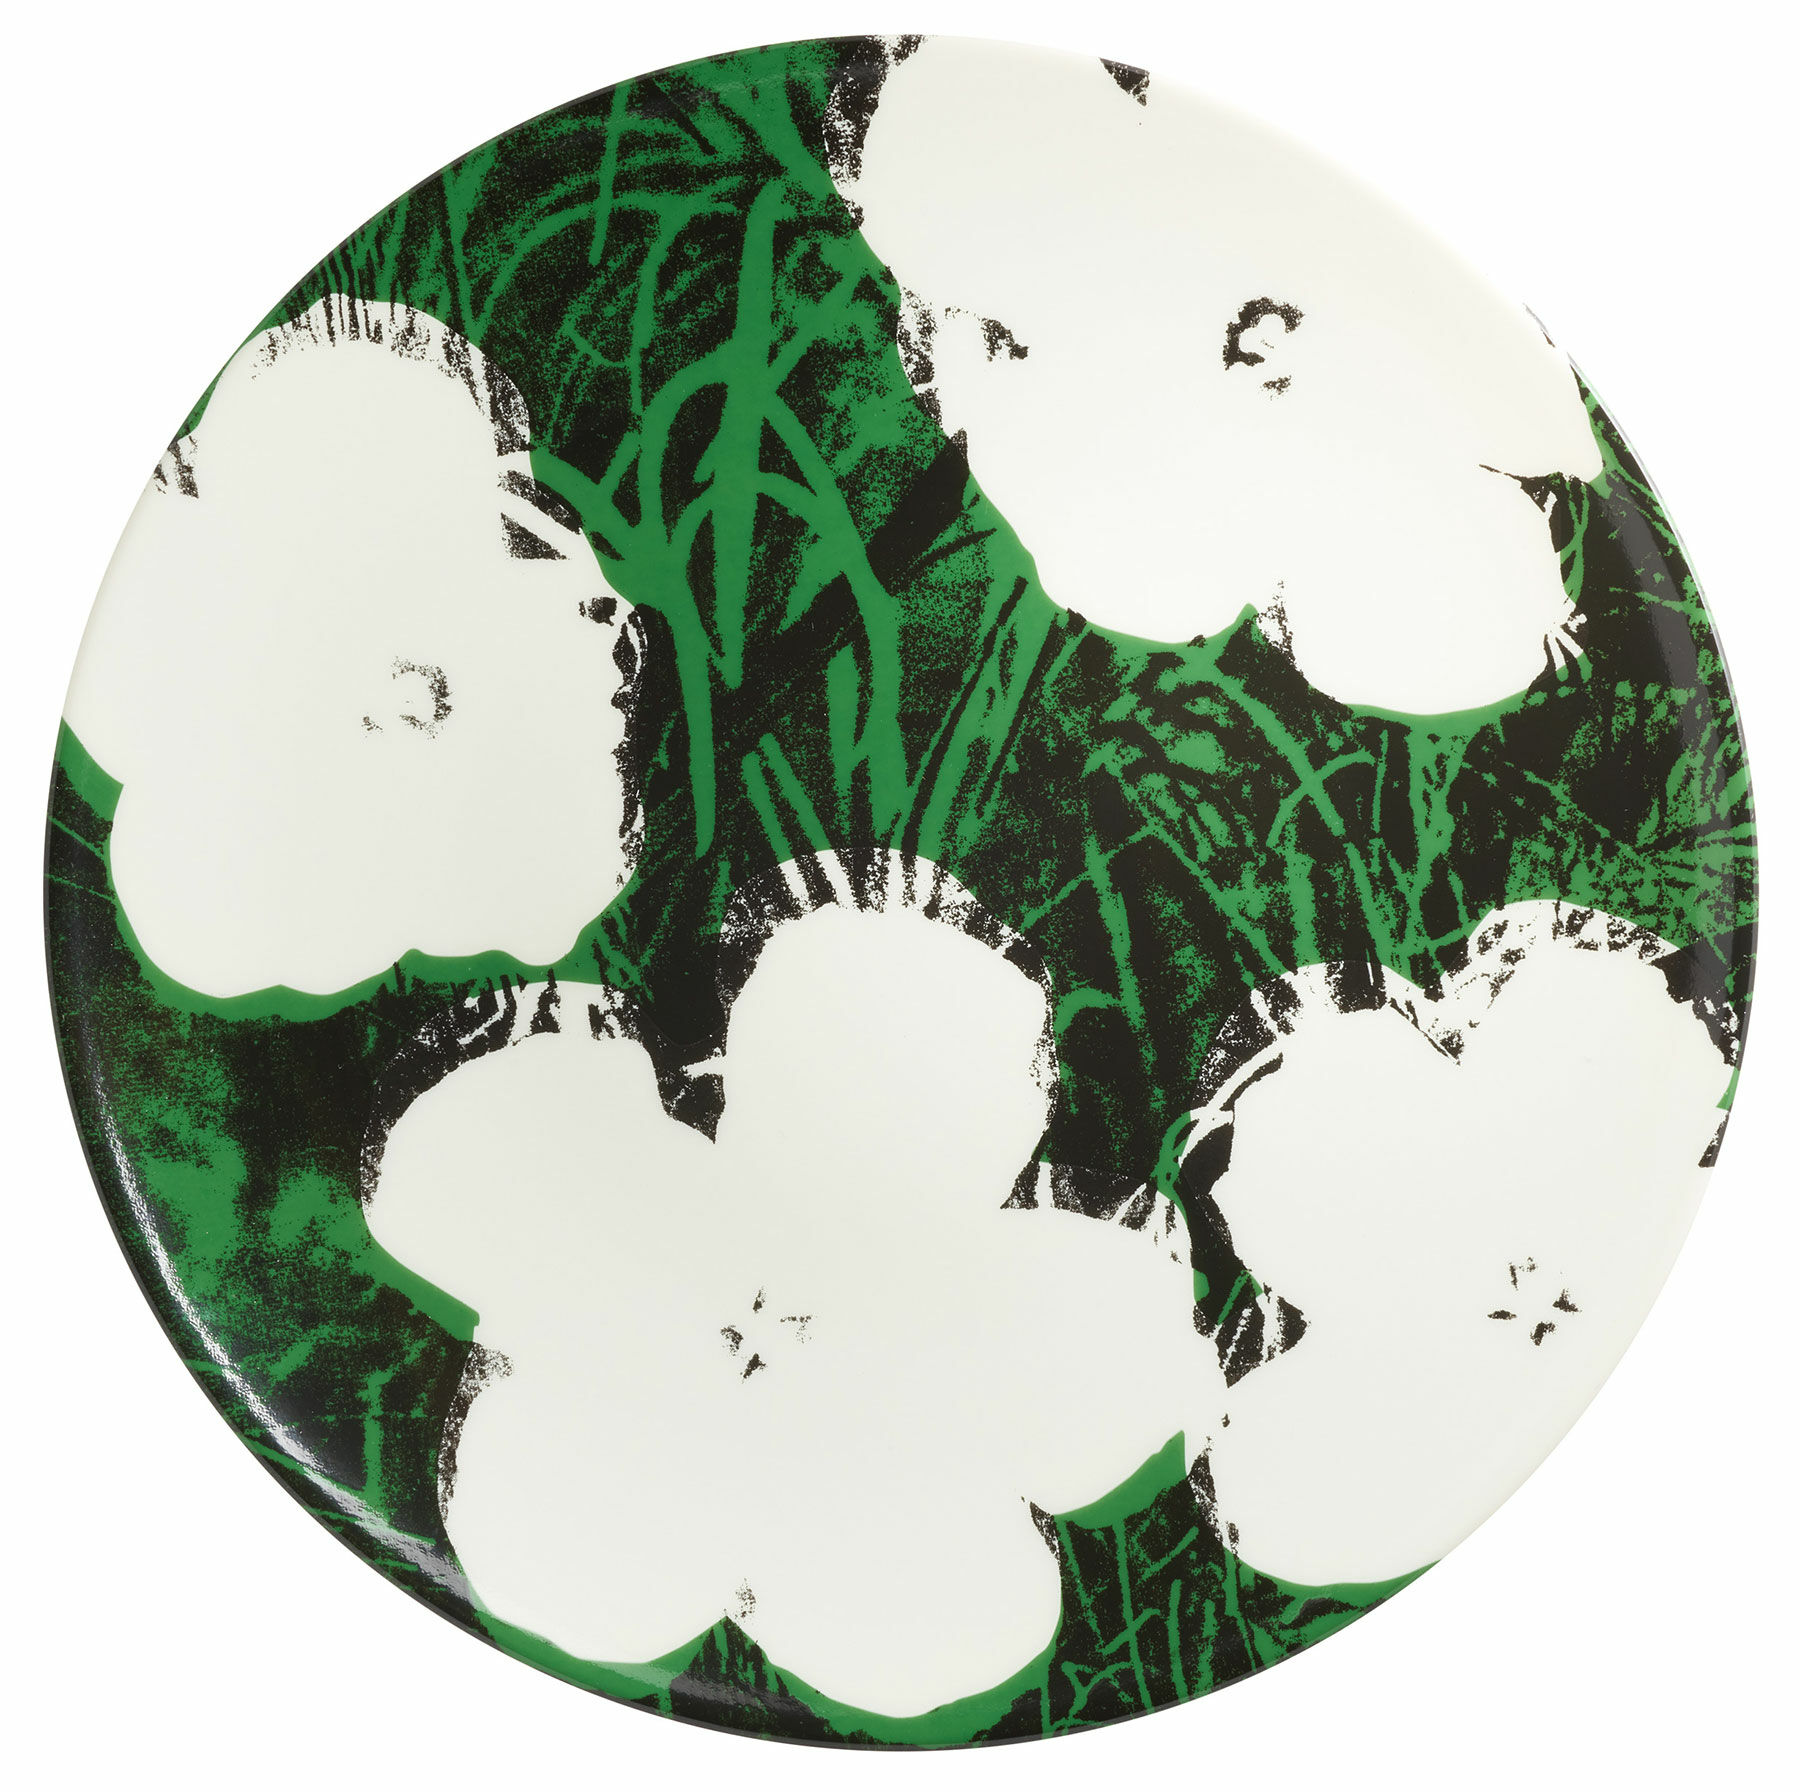 Porcelain plate "Flowers" (white) by Andy Warhol